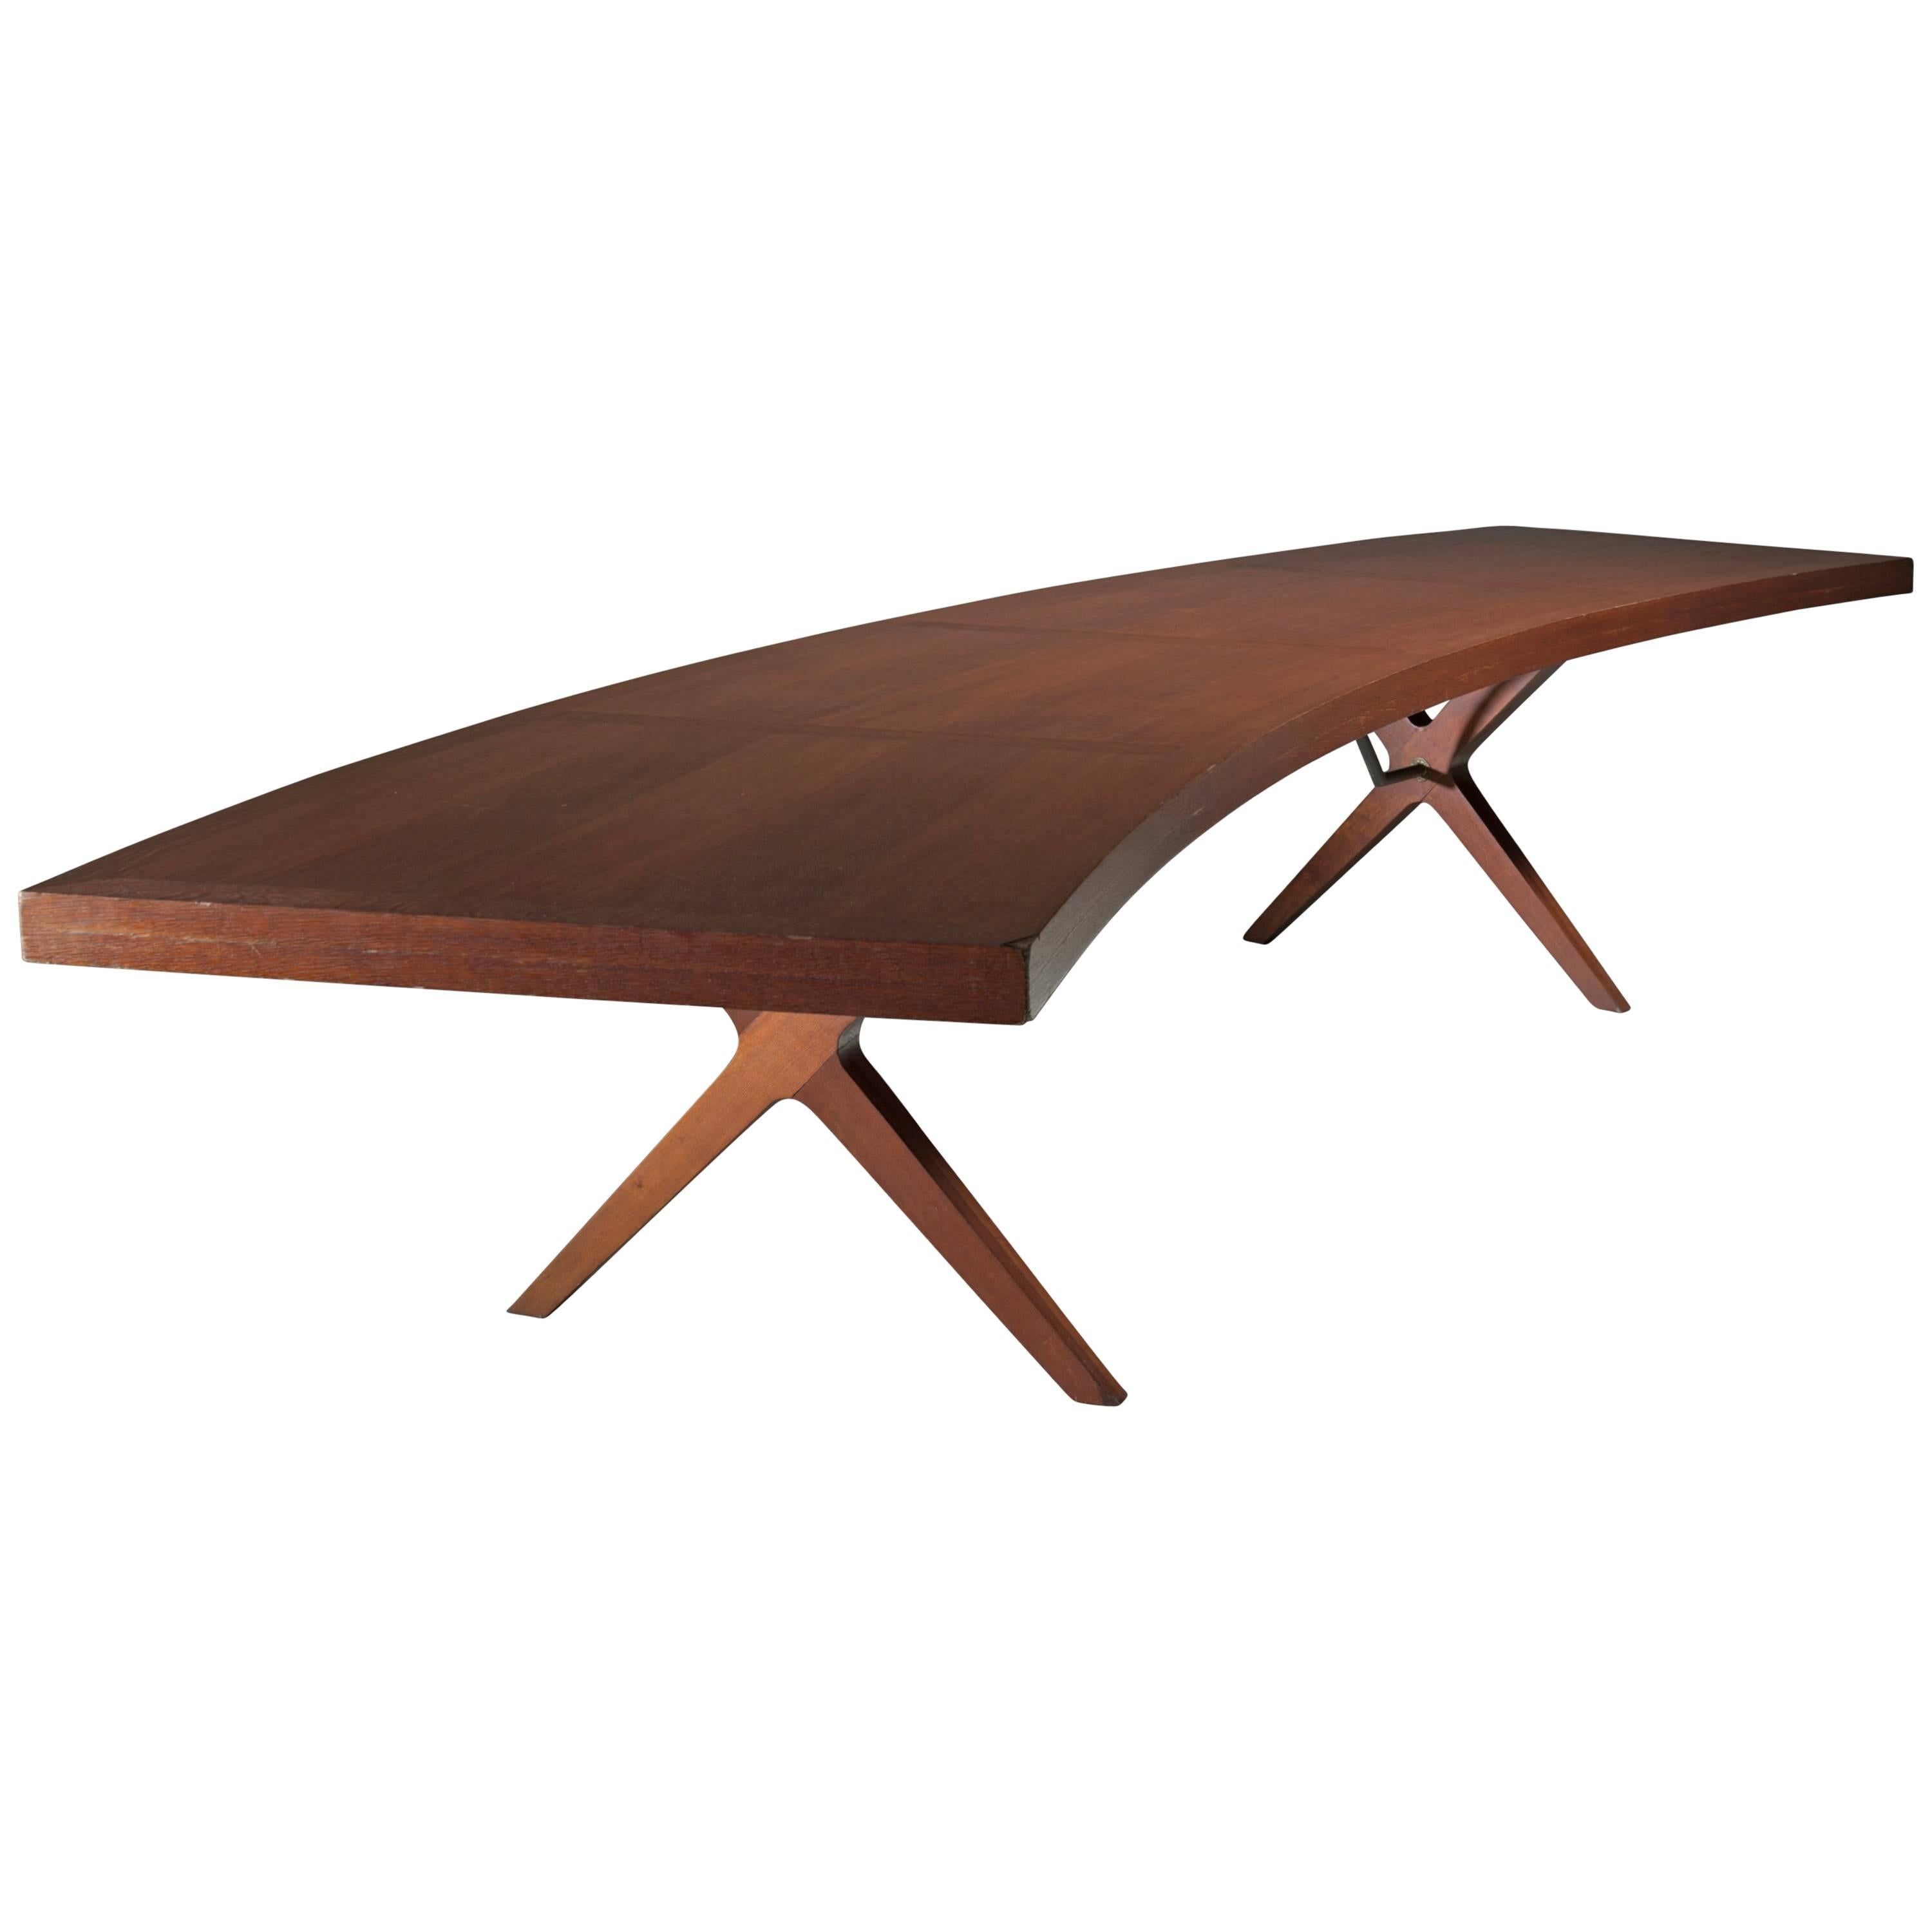 L.E Brevilly Extremely Large Boomerang Shaped Desk, France, circa 1965